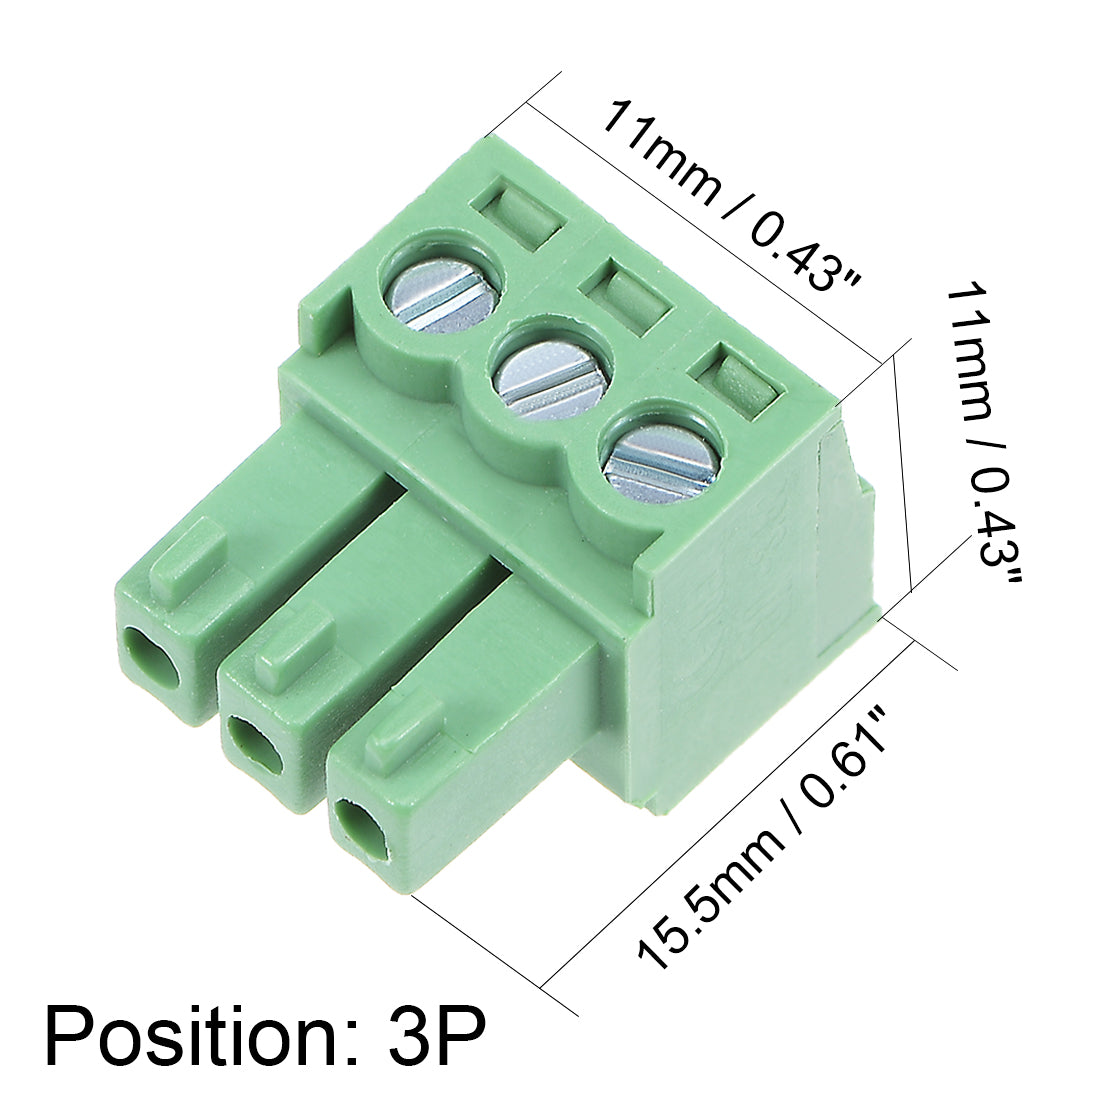 uxcell Uxcell 15Pcs AC300V 8A 3.5mm Pitch 3P Flat Angle Needle Seat Insert-In PCB Terminal Block Connector green